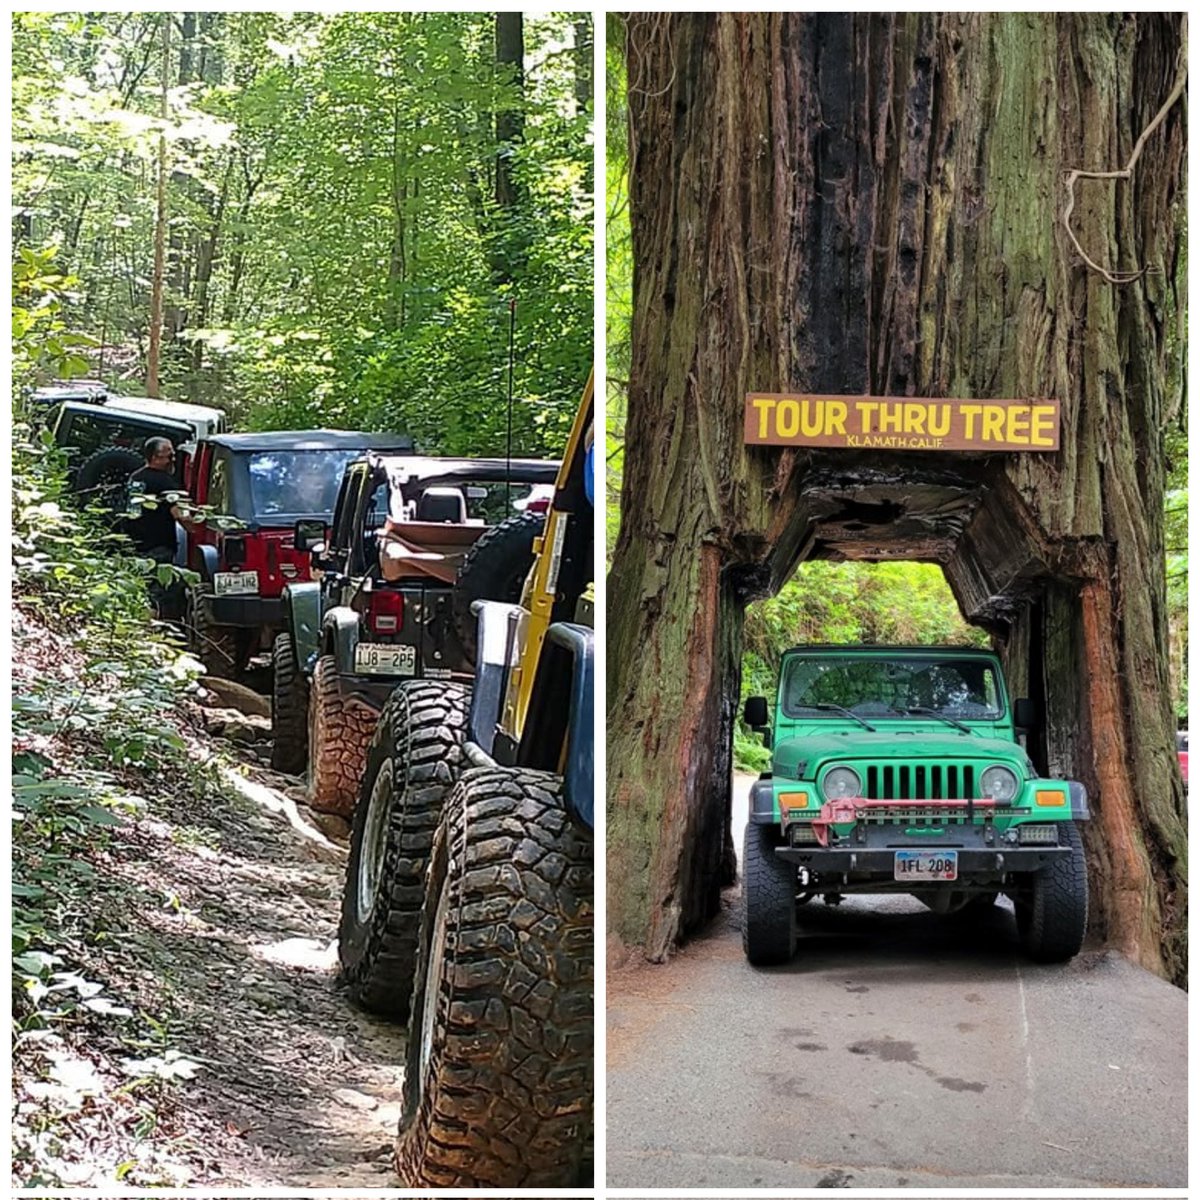 Good morning Mafia 👋😁 Whether we roll by them, or we roll thru them, we #LoveATreeDay any chance we get. They make everything cooler 😎, be safe out there and have a great day ✌️